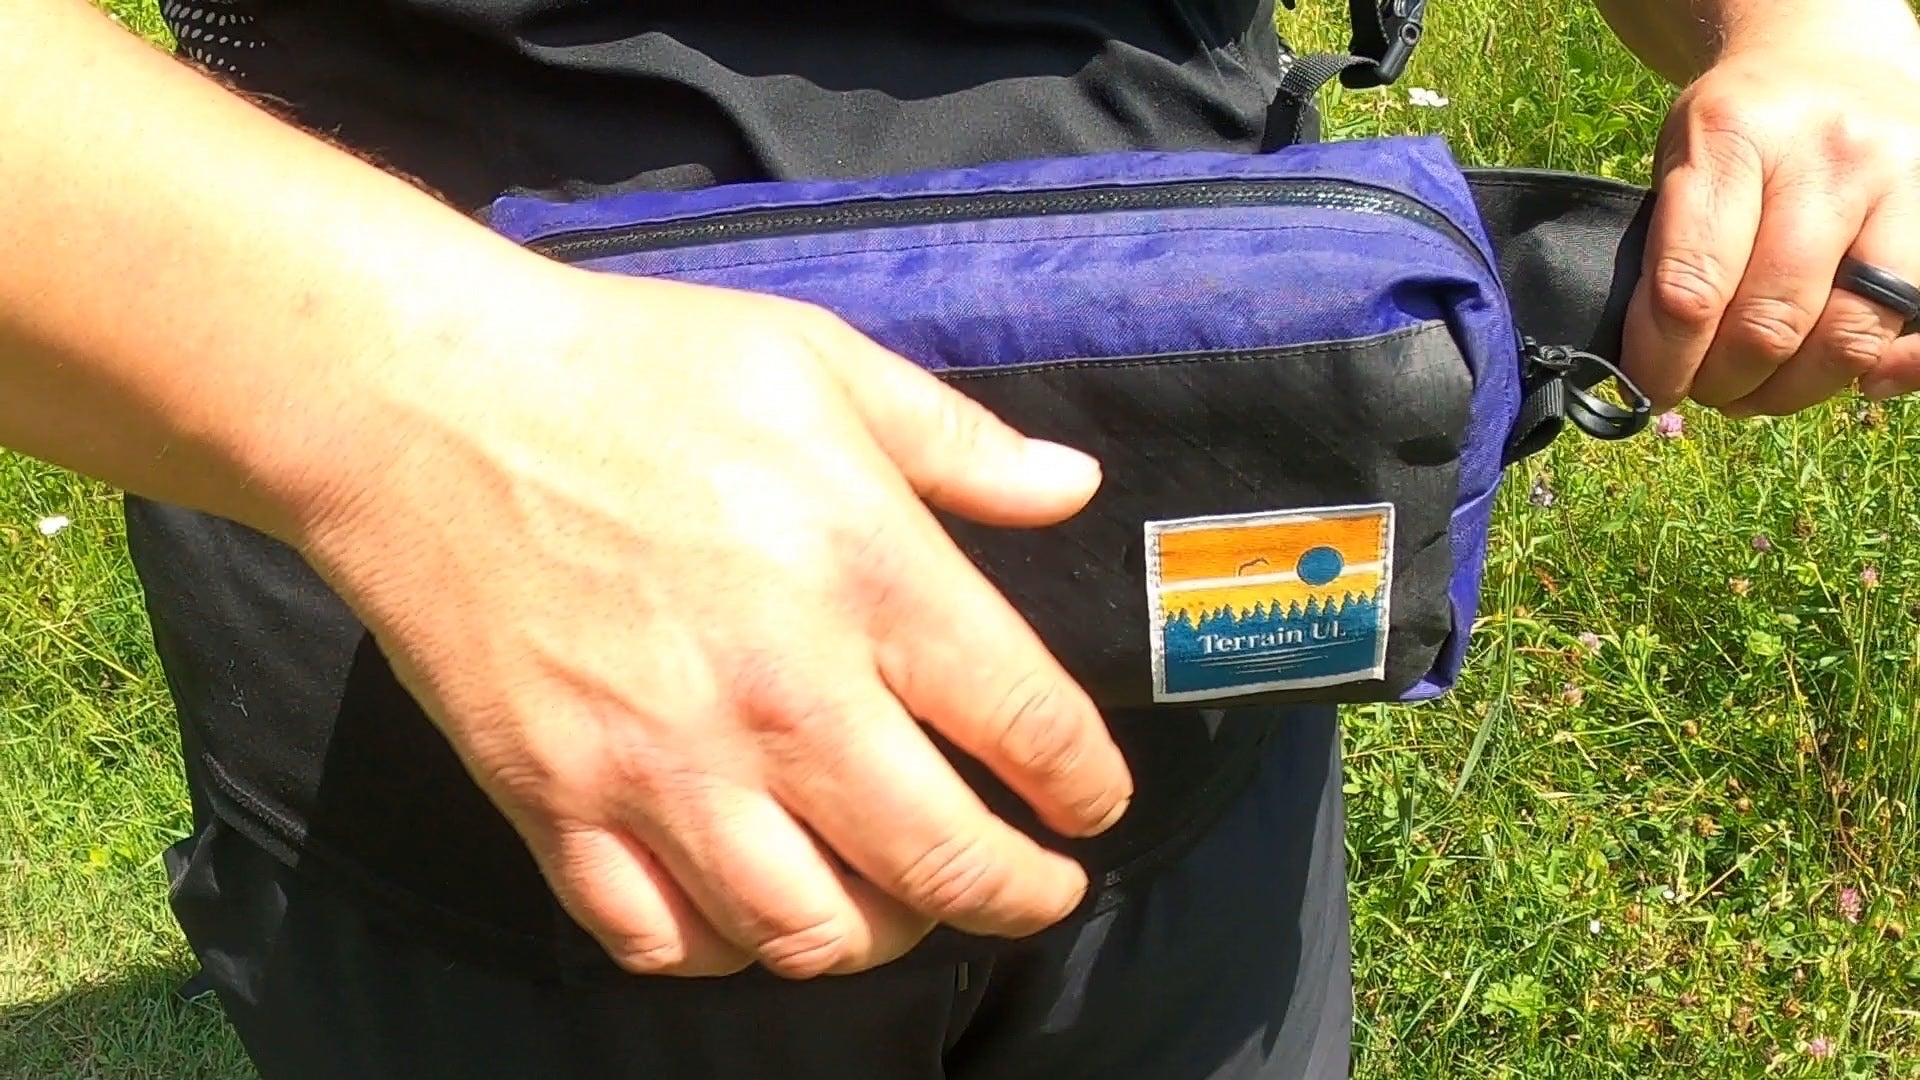 Load video: Dettach fanny pack hip belt buckles and attach buckles to Free Range backpack and tighten to adjust.